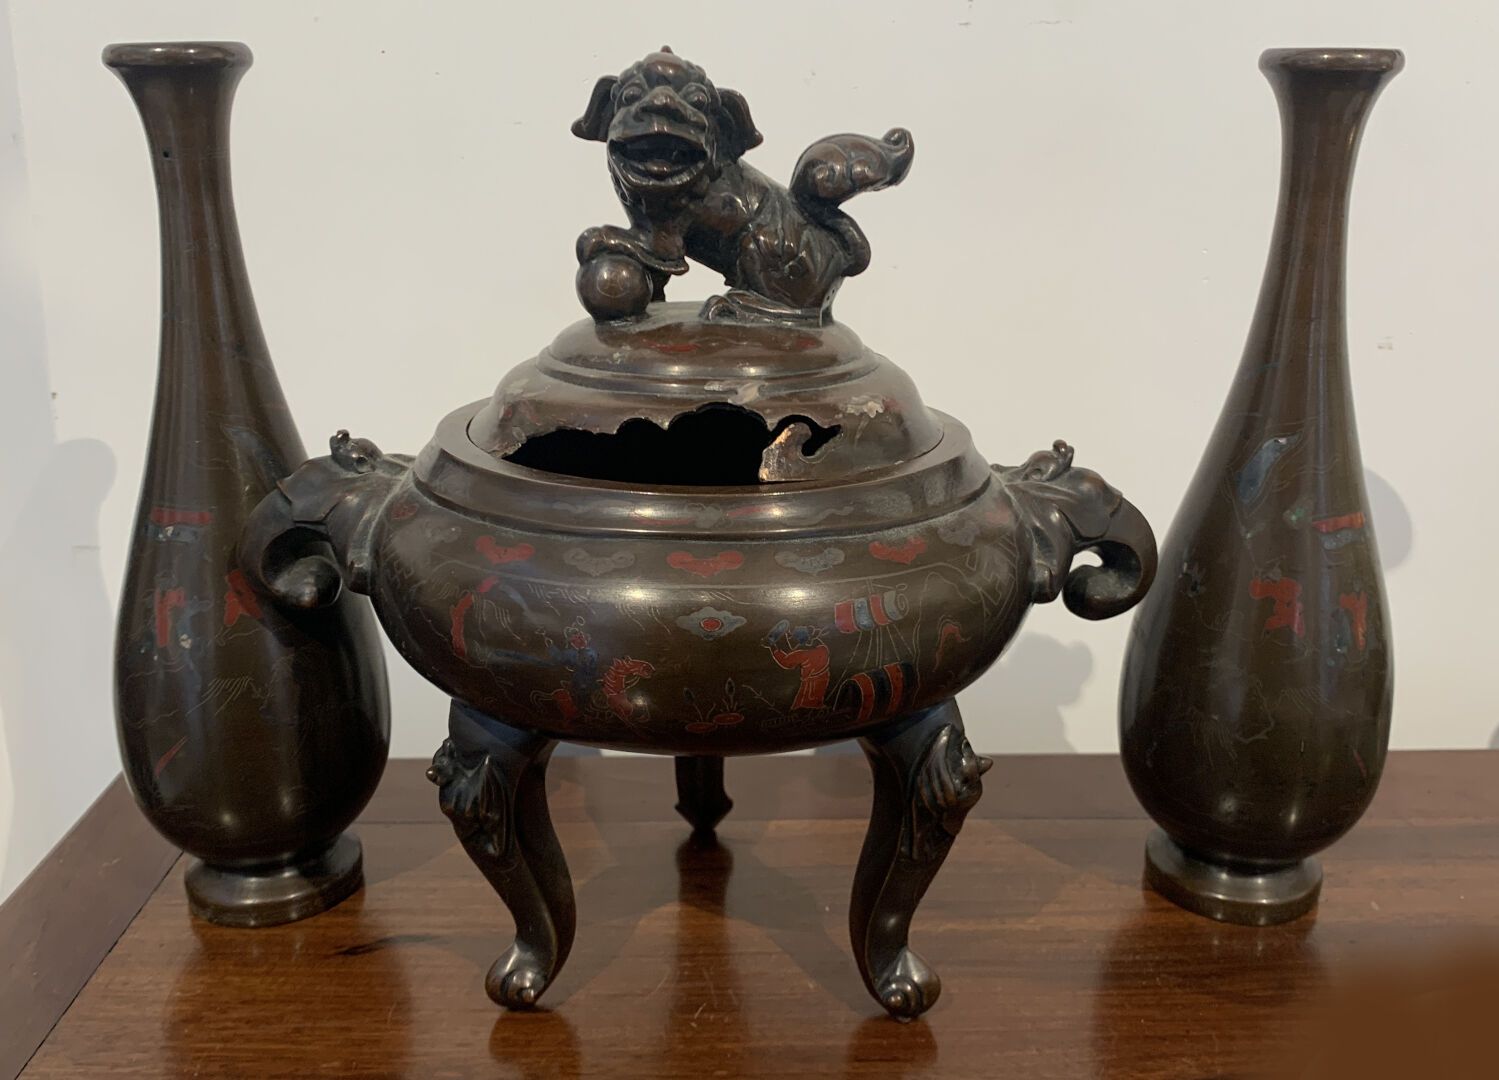 VIETNAM - Vers 1900 FURNITURE including a BURNER, SOCLE and two VASES 
Bronze ni&hellip;